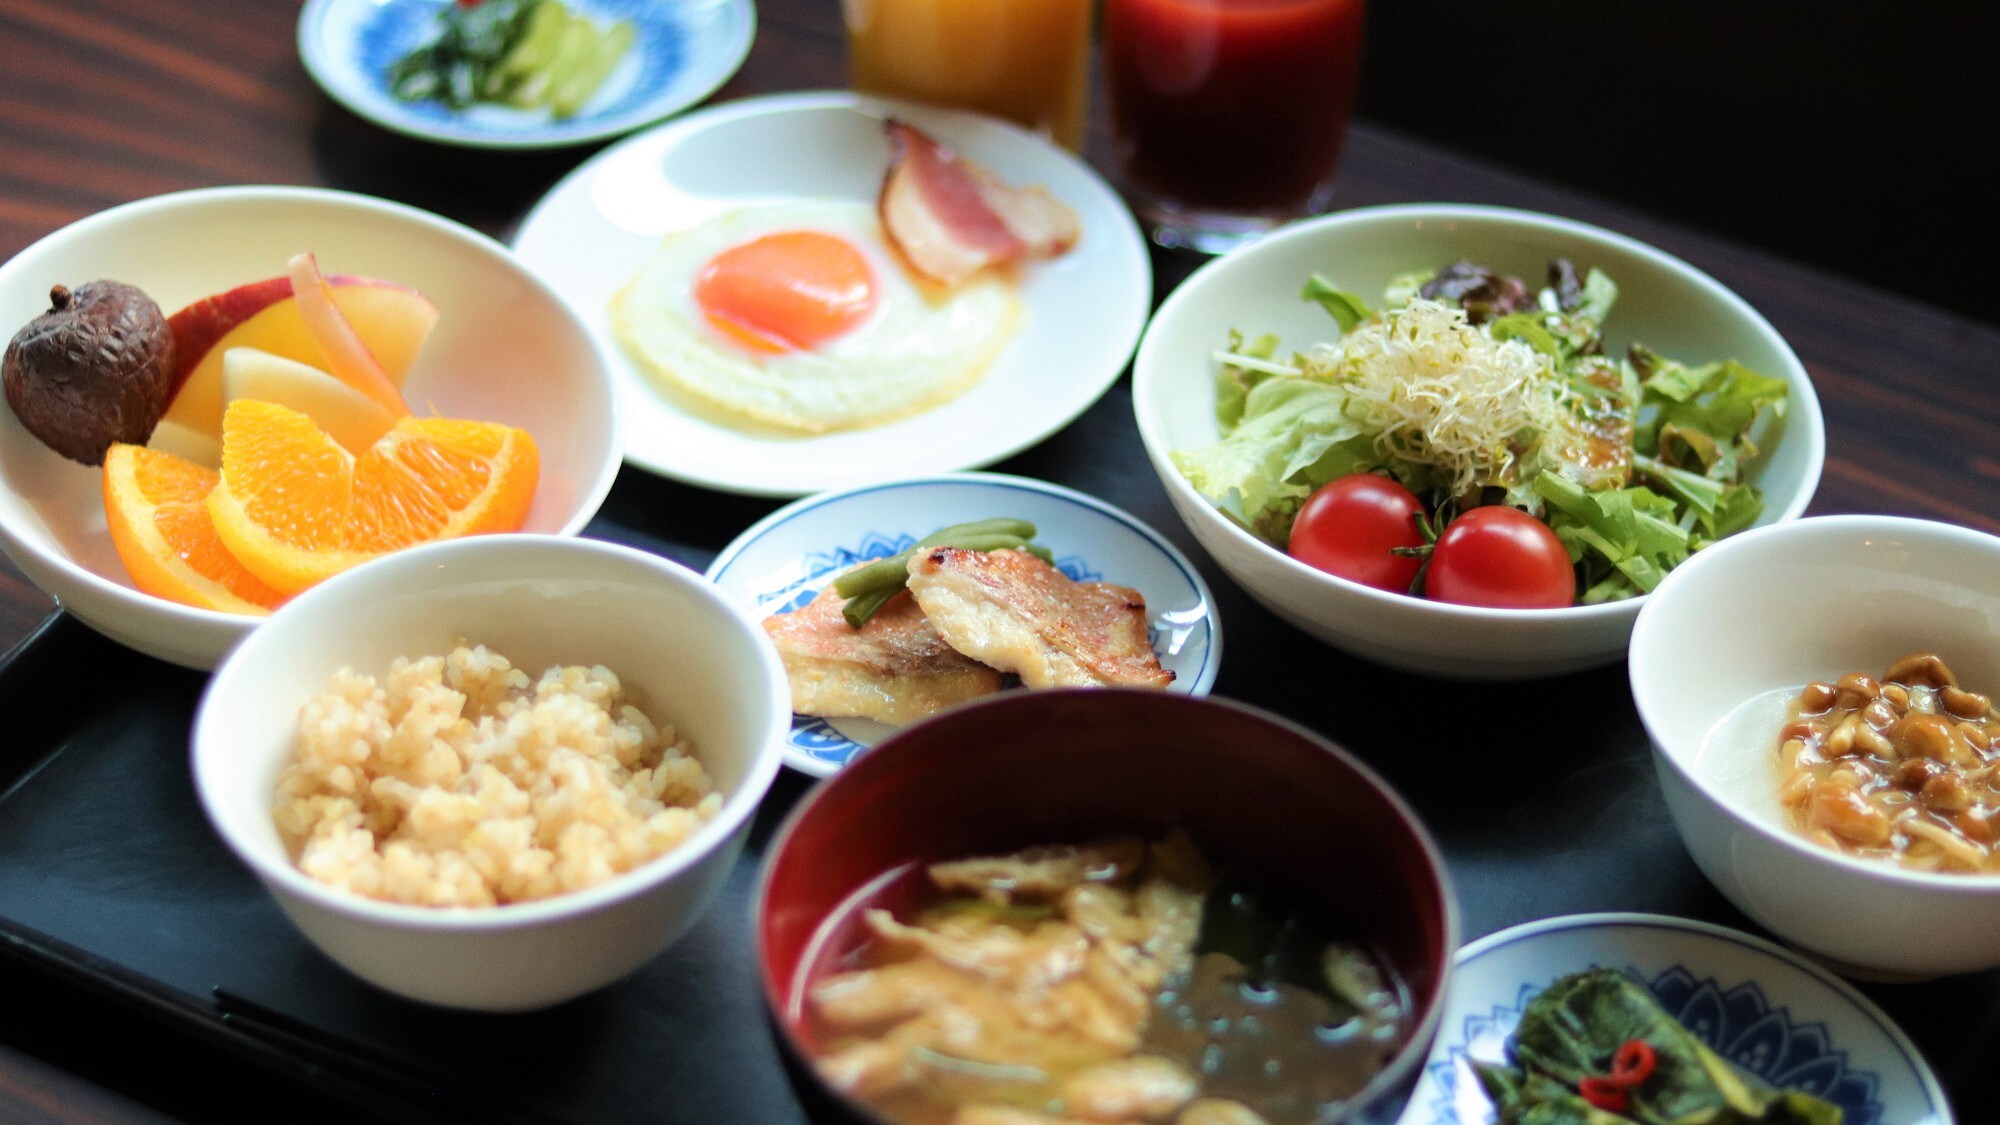 [Breakfast buffet] Energize your morning with a healthy breakfast.